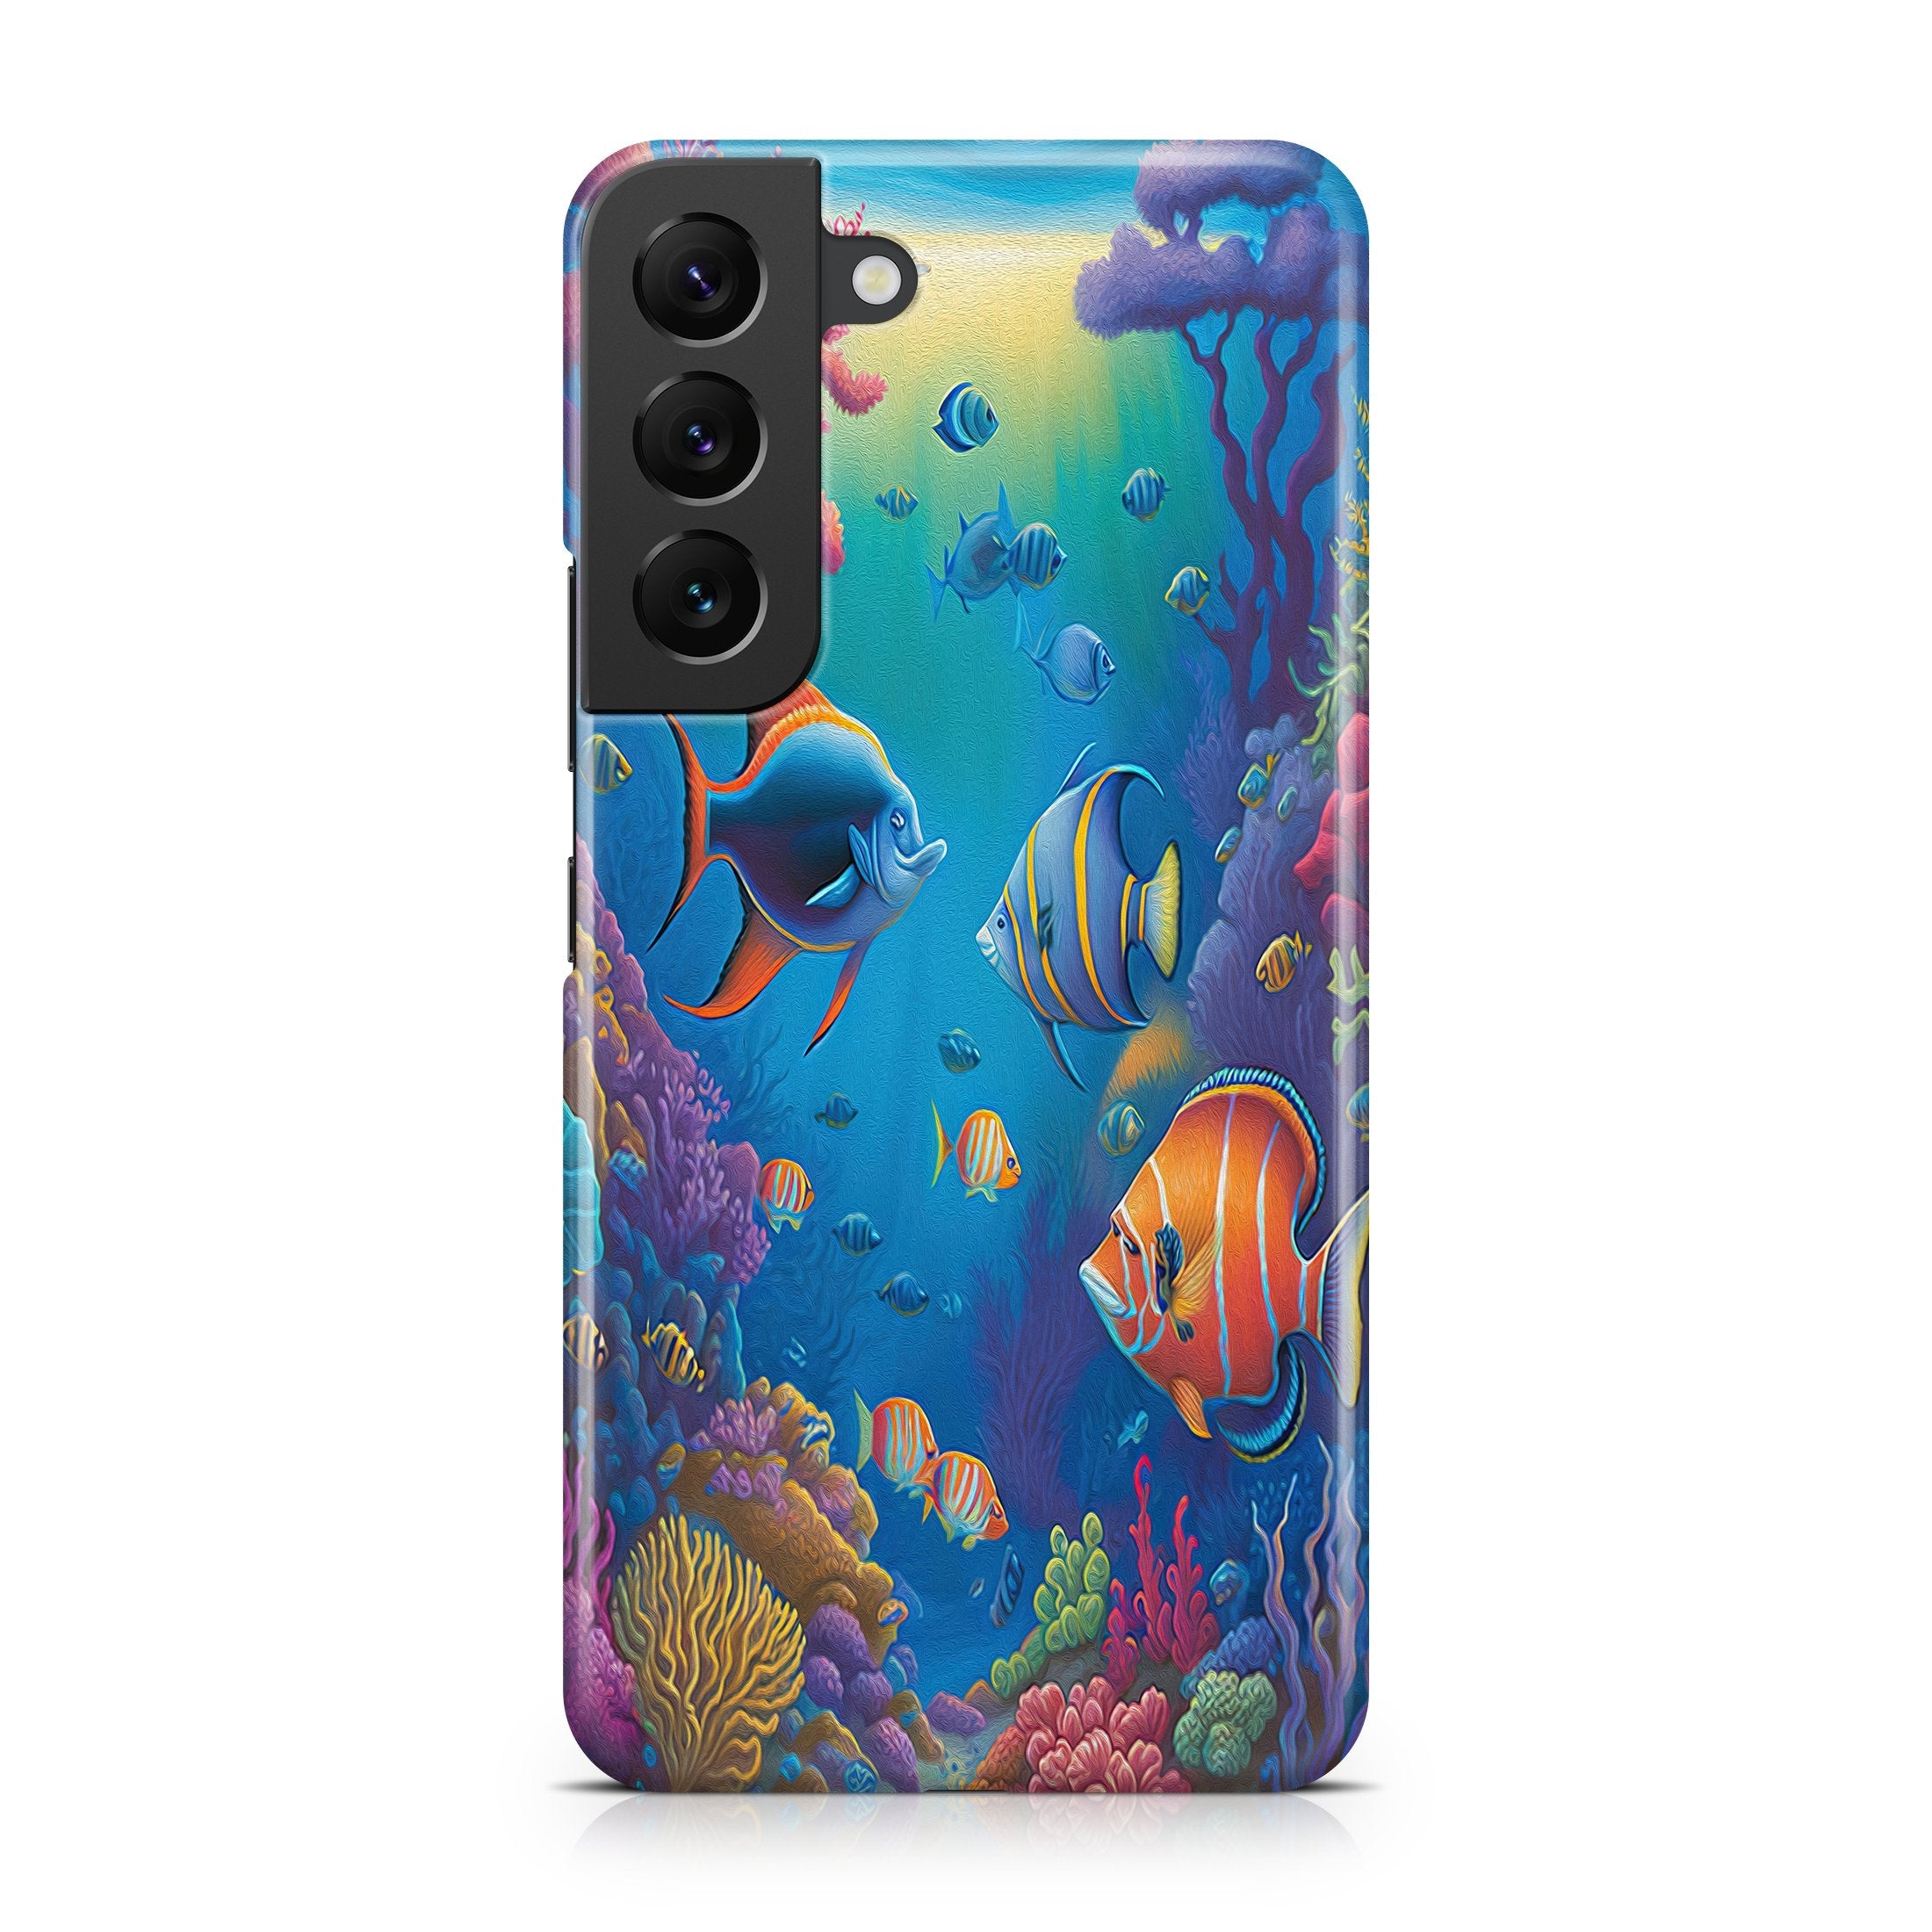 Heavenly Coral - Samsung phone case designs by CaseSwagger